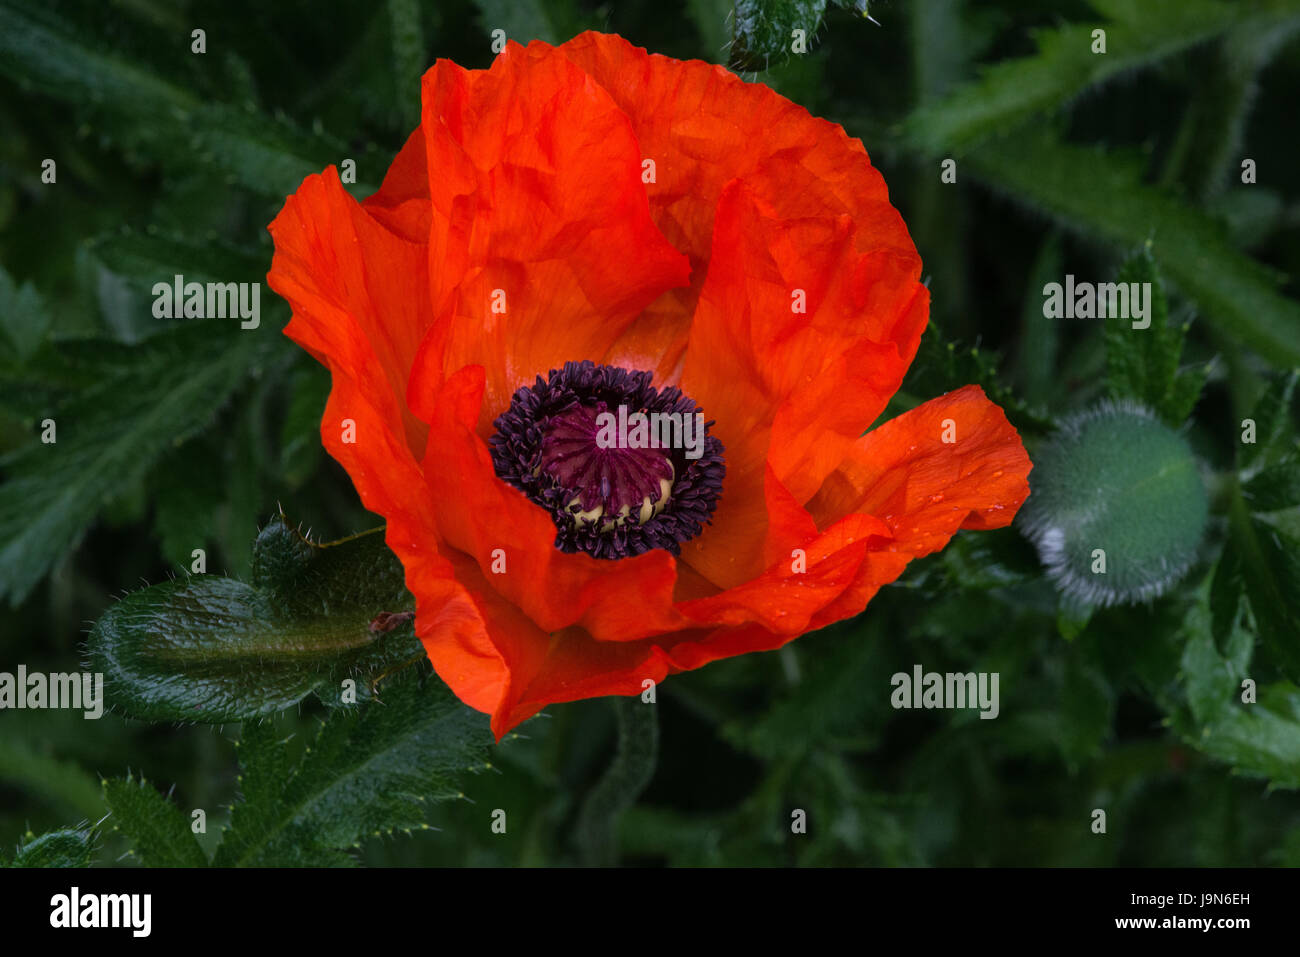 Plant and flower of the orange summer flowers of Oriental Poppy 'Brilliant' in the garden in Blackpool, Lancashire, England, UK. Stock Photo